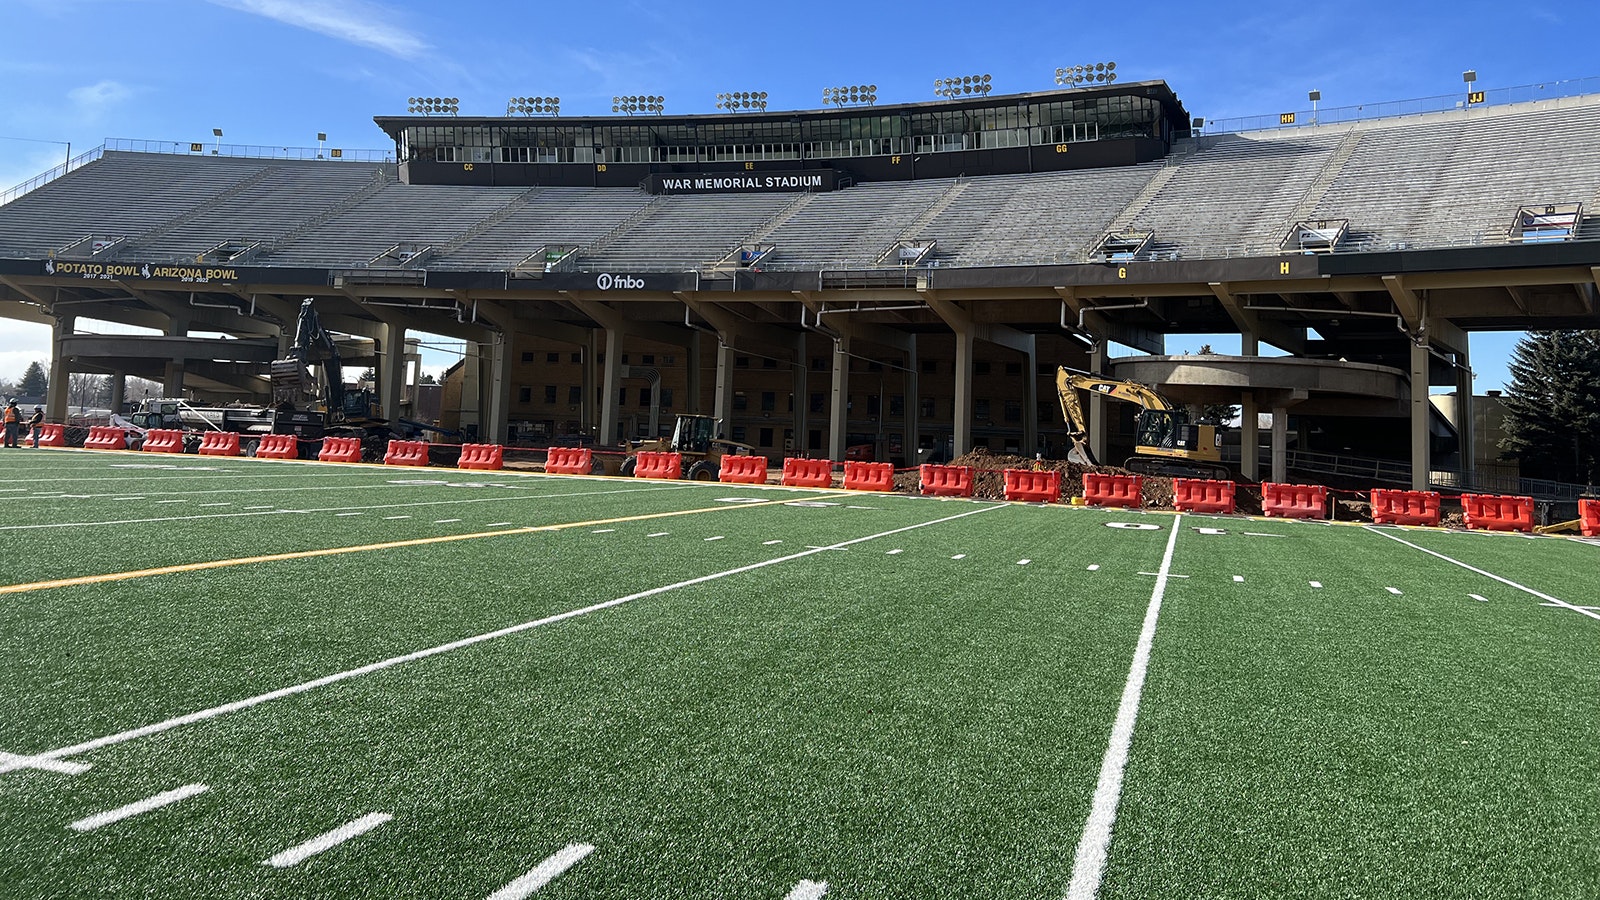 The west side of War Memorial Stadium at the University of Wyoming is getting an $85 million upgrade, which will include improved seating in the middle west section.